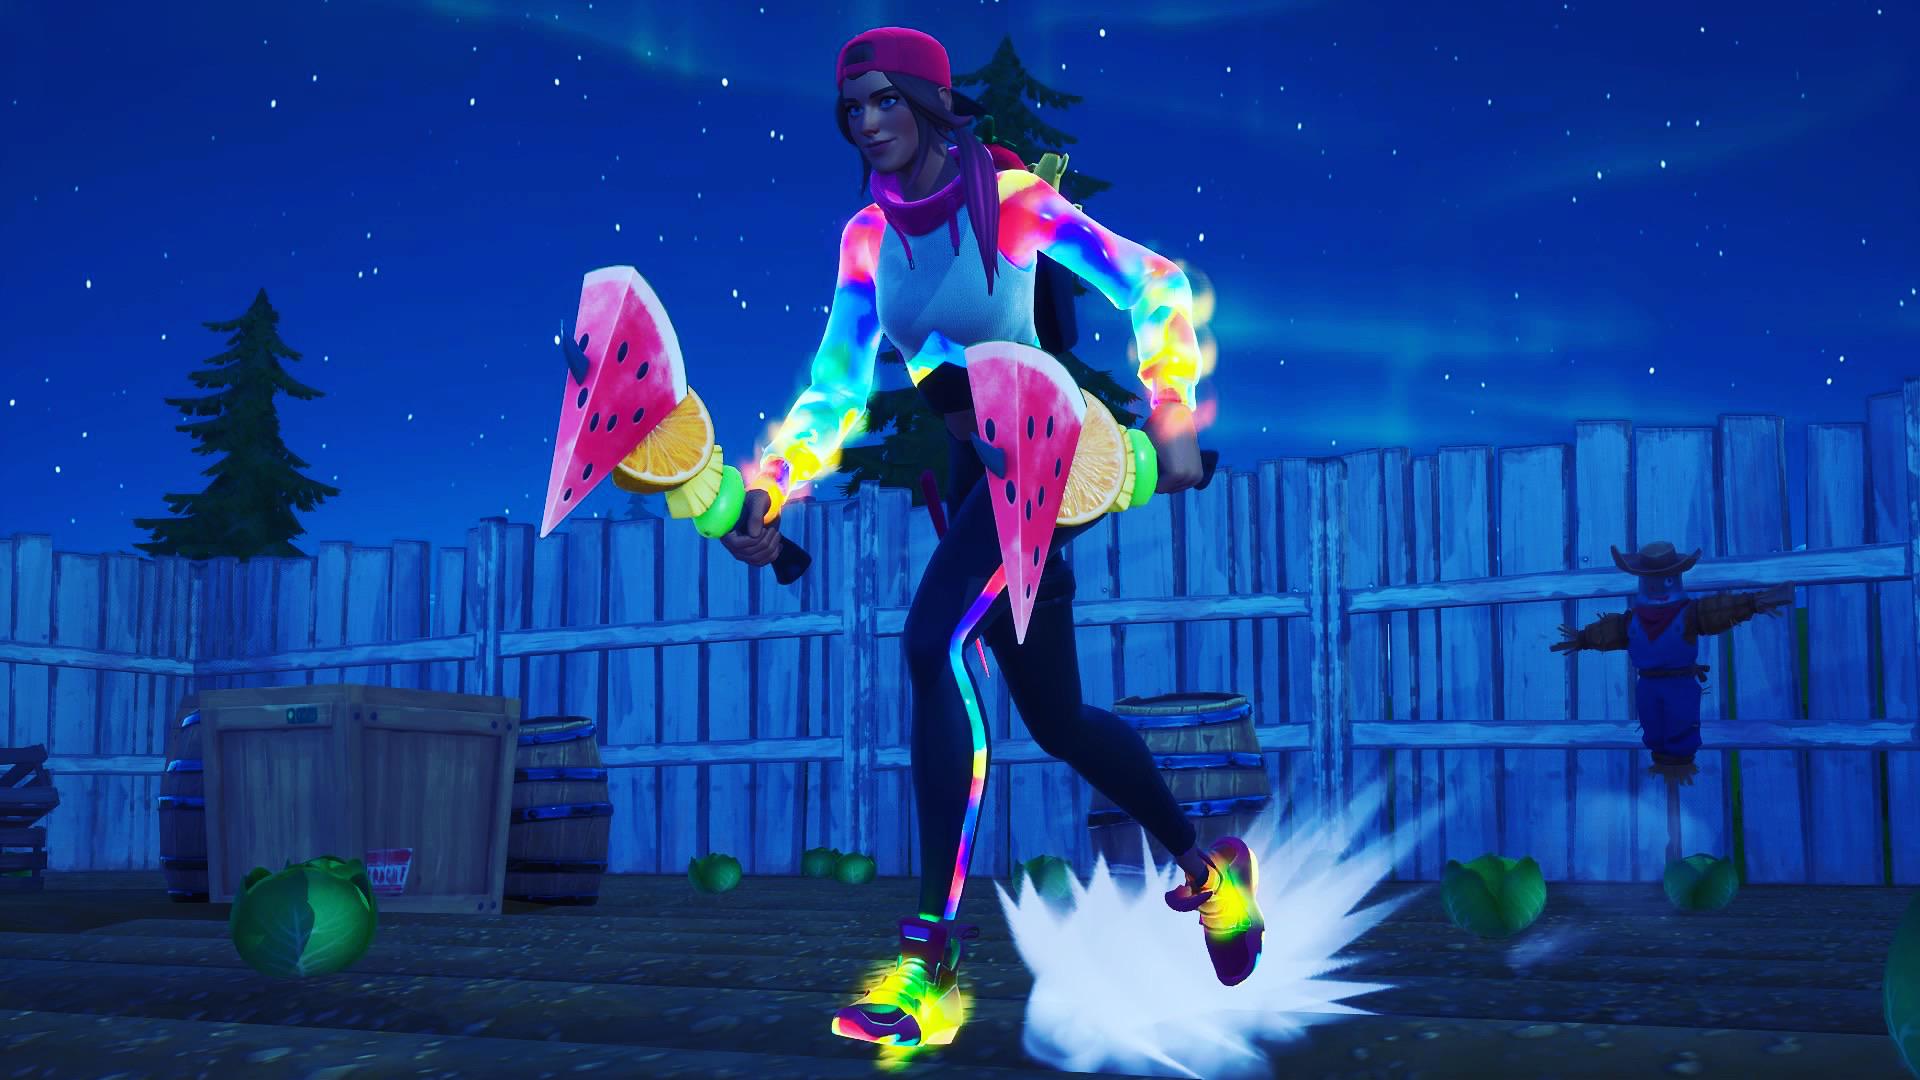 What's your opinion on loserfruits skin and here's a screenshot